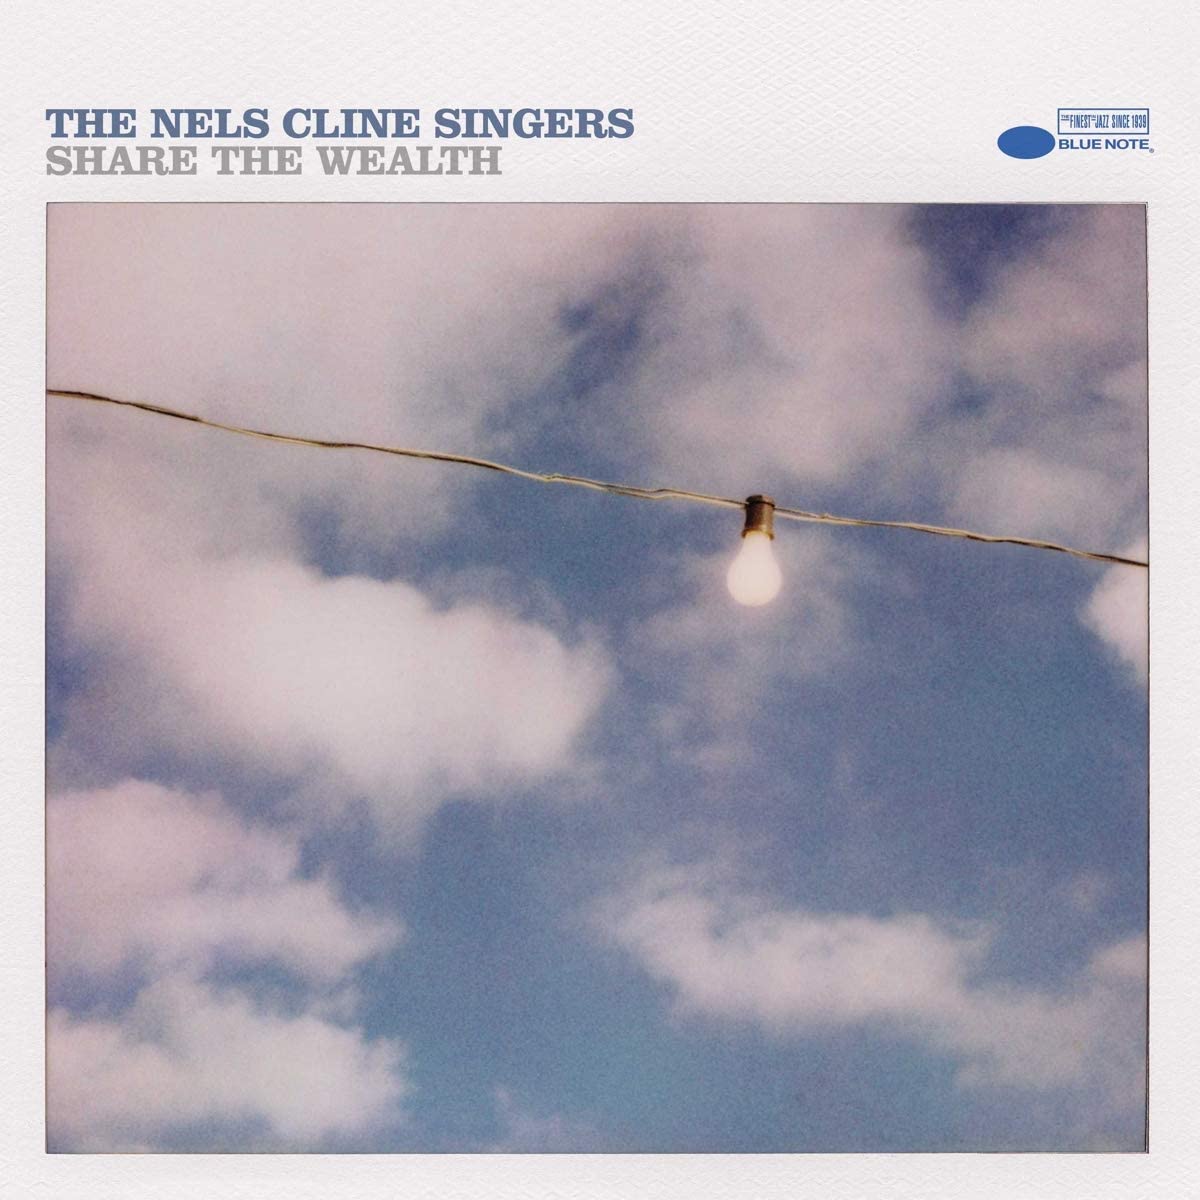 On Nels Cline's third release on Vinyl  'Share The Wealth', the sonic explorer and guitar renegade delivers a potent and provocative program of spontaneous, uncompromising, and ultimately compelling music.